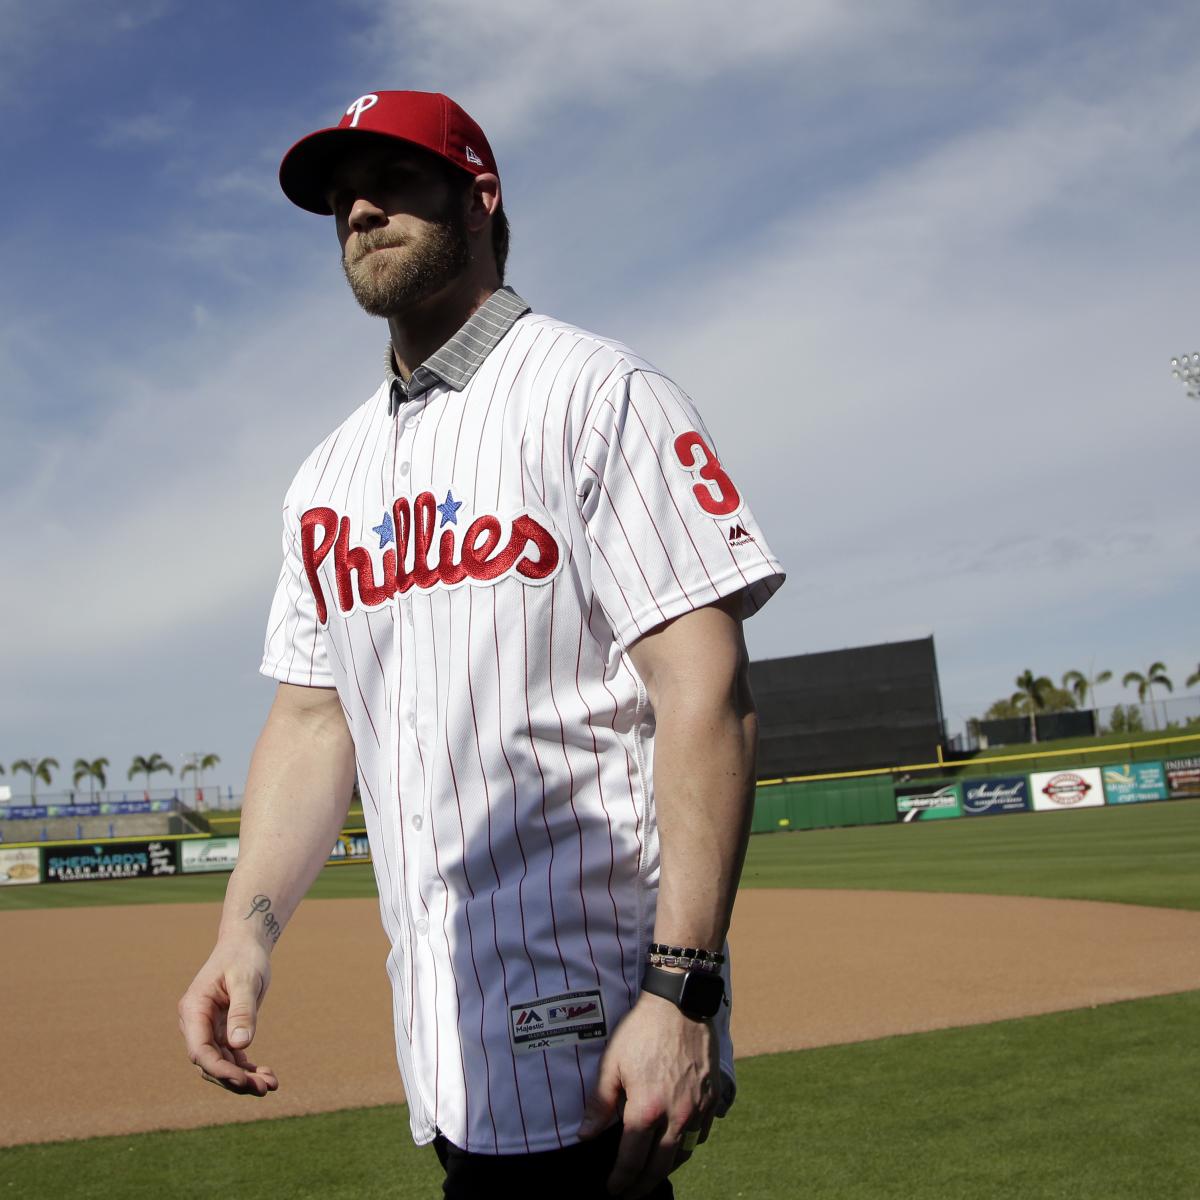 Out at the plate: Customs agents seize fake Bryce Harper jerseys